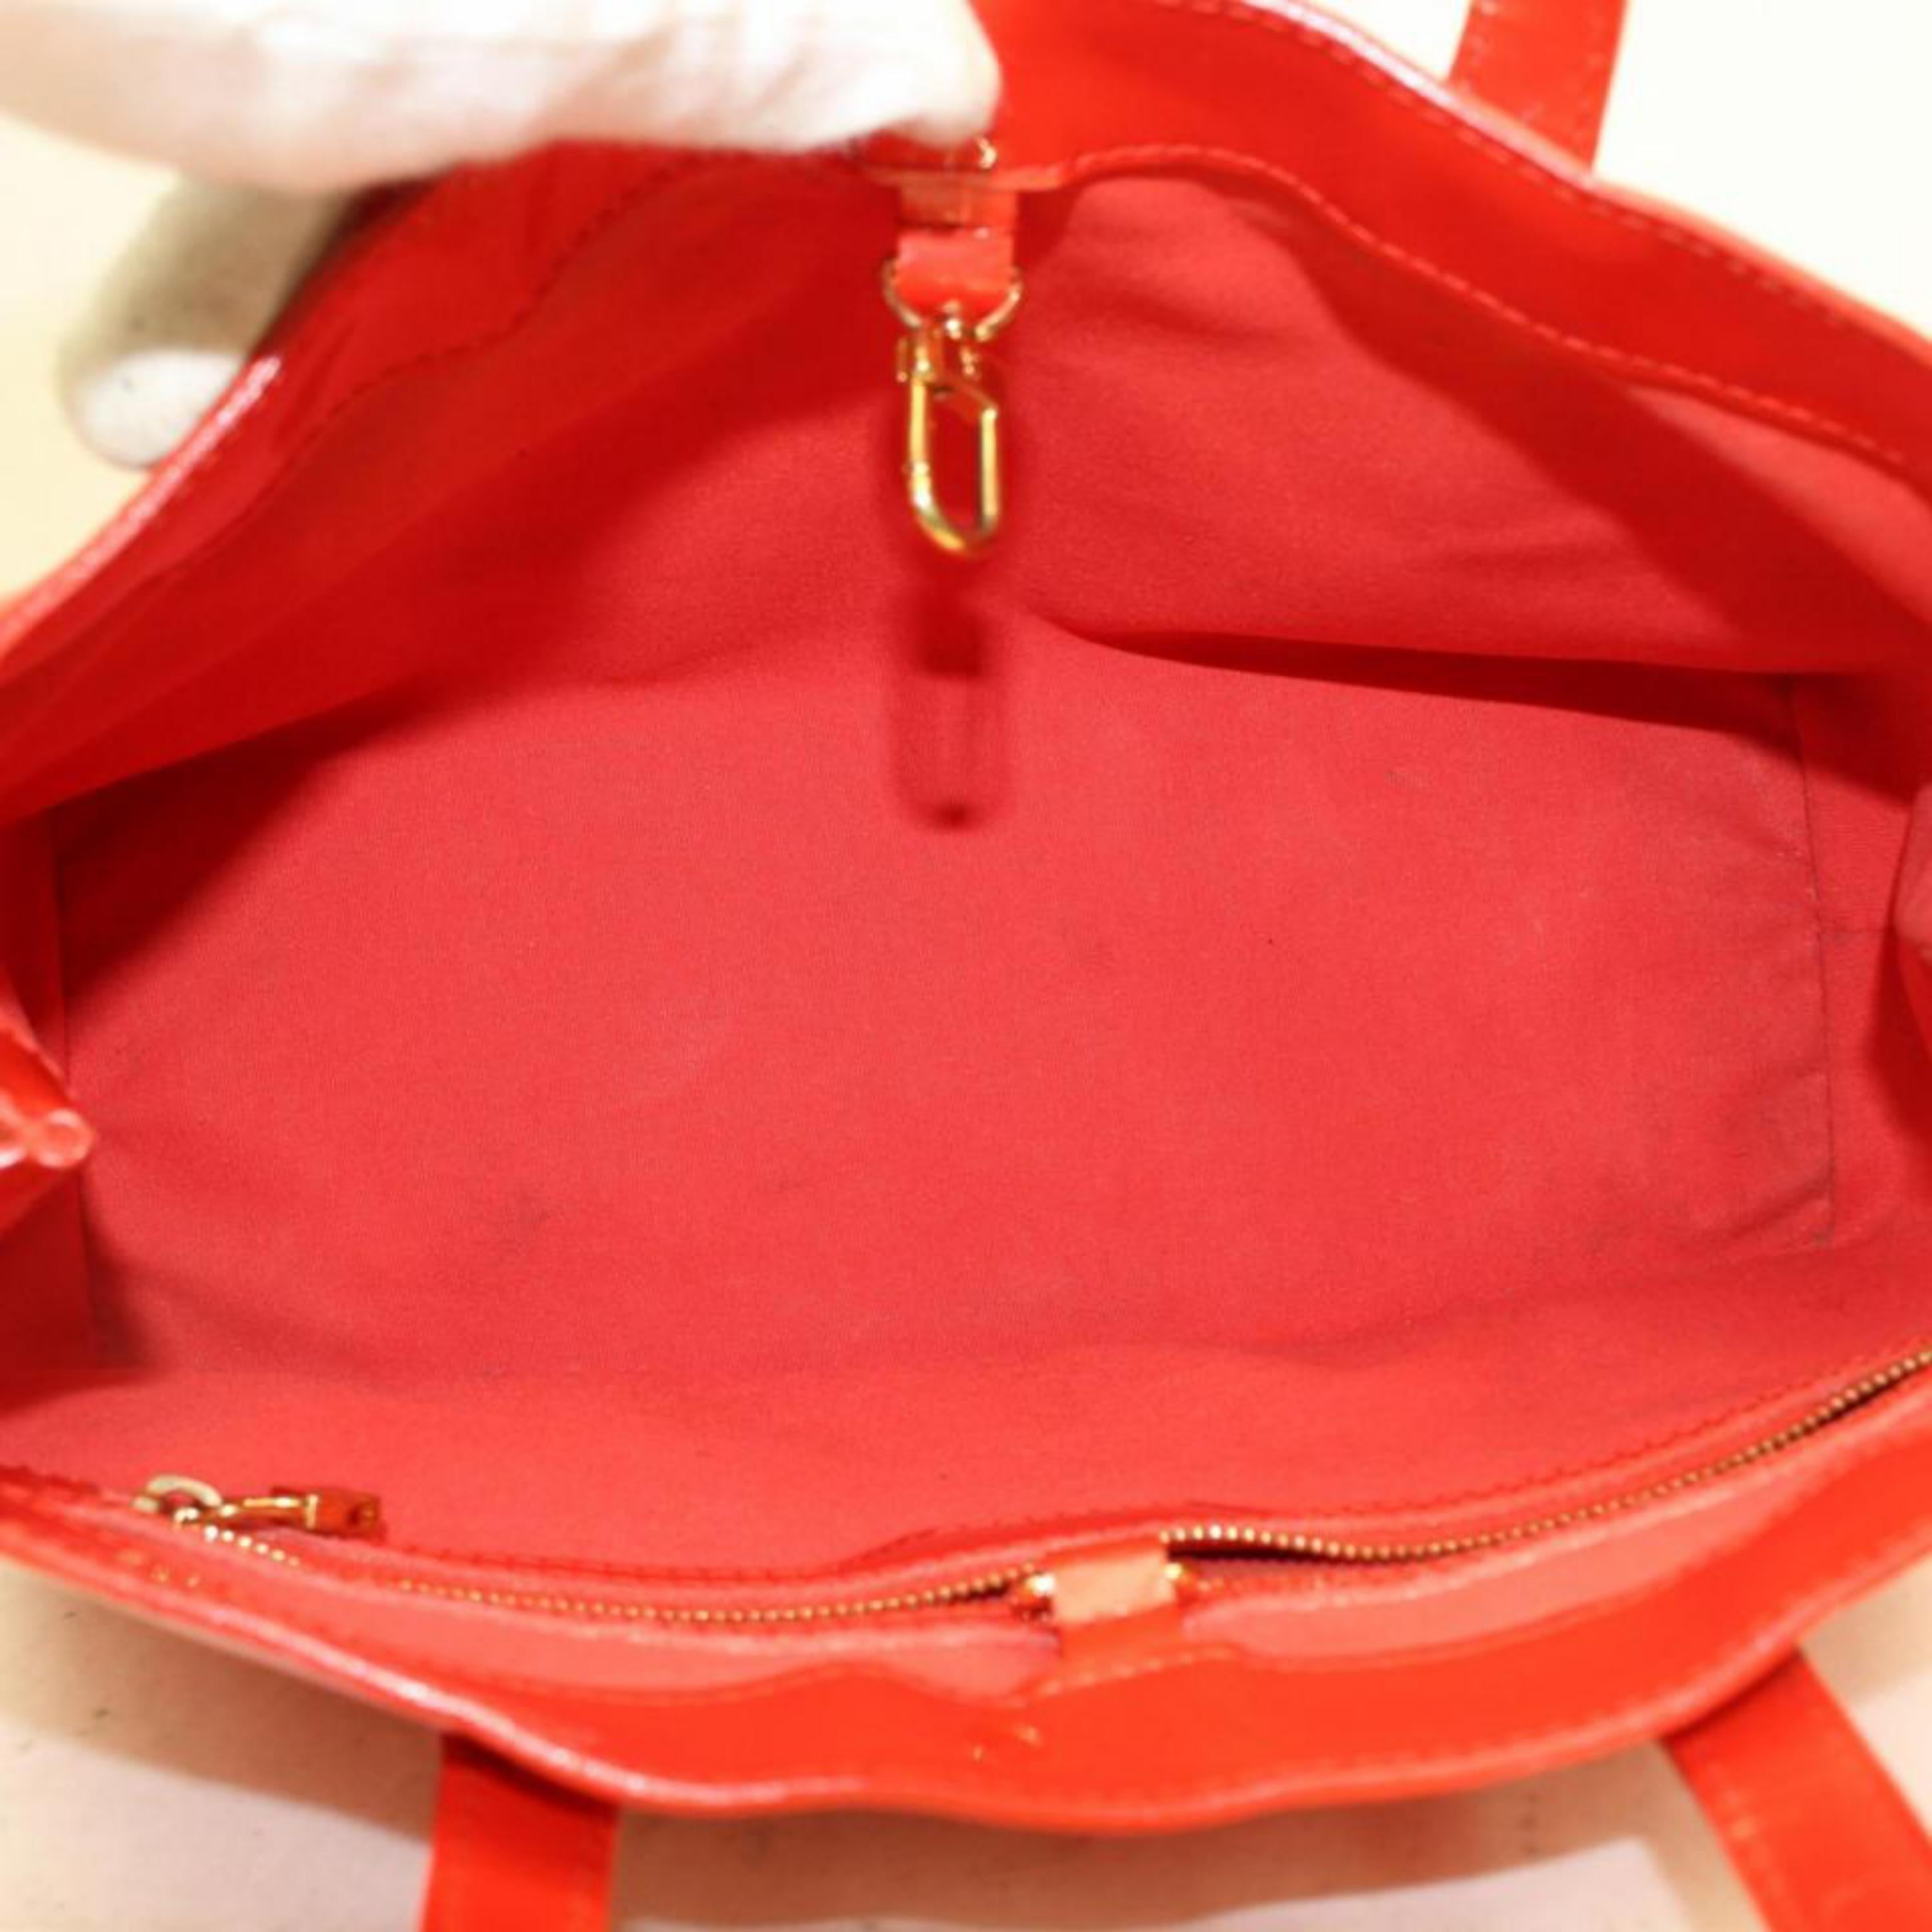 Louis Vuitton Wilshire Monogram Vernis Pm 869517 Red Patent Leather Tote In Good Condition For Sale In Forest Hills, NY